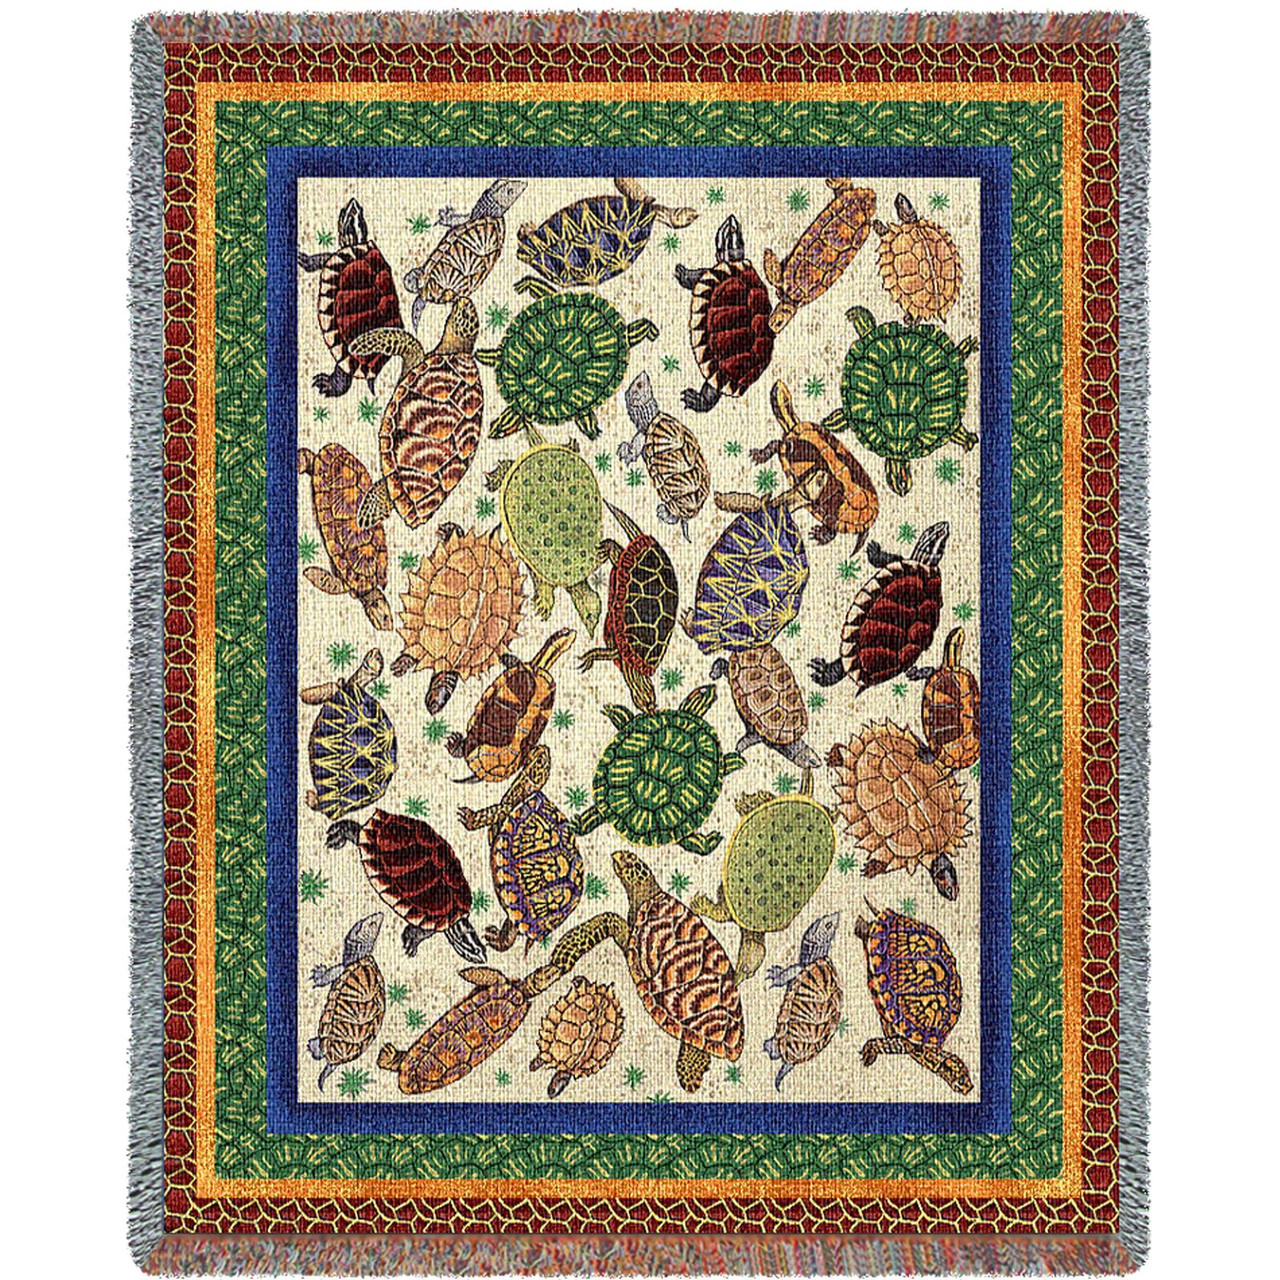 Turtles Woven Art Tapestry Throw 1217-T Made in USA 